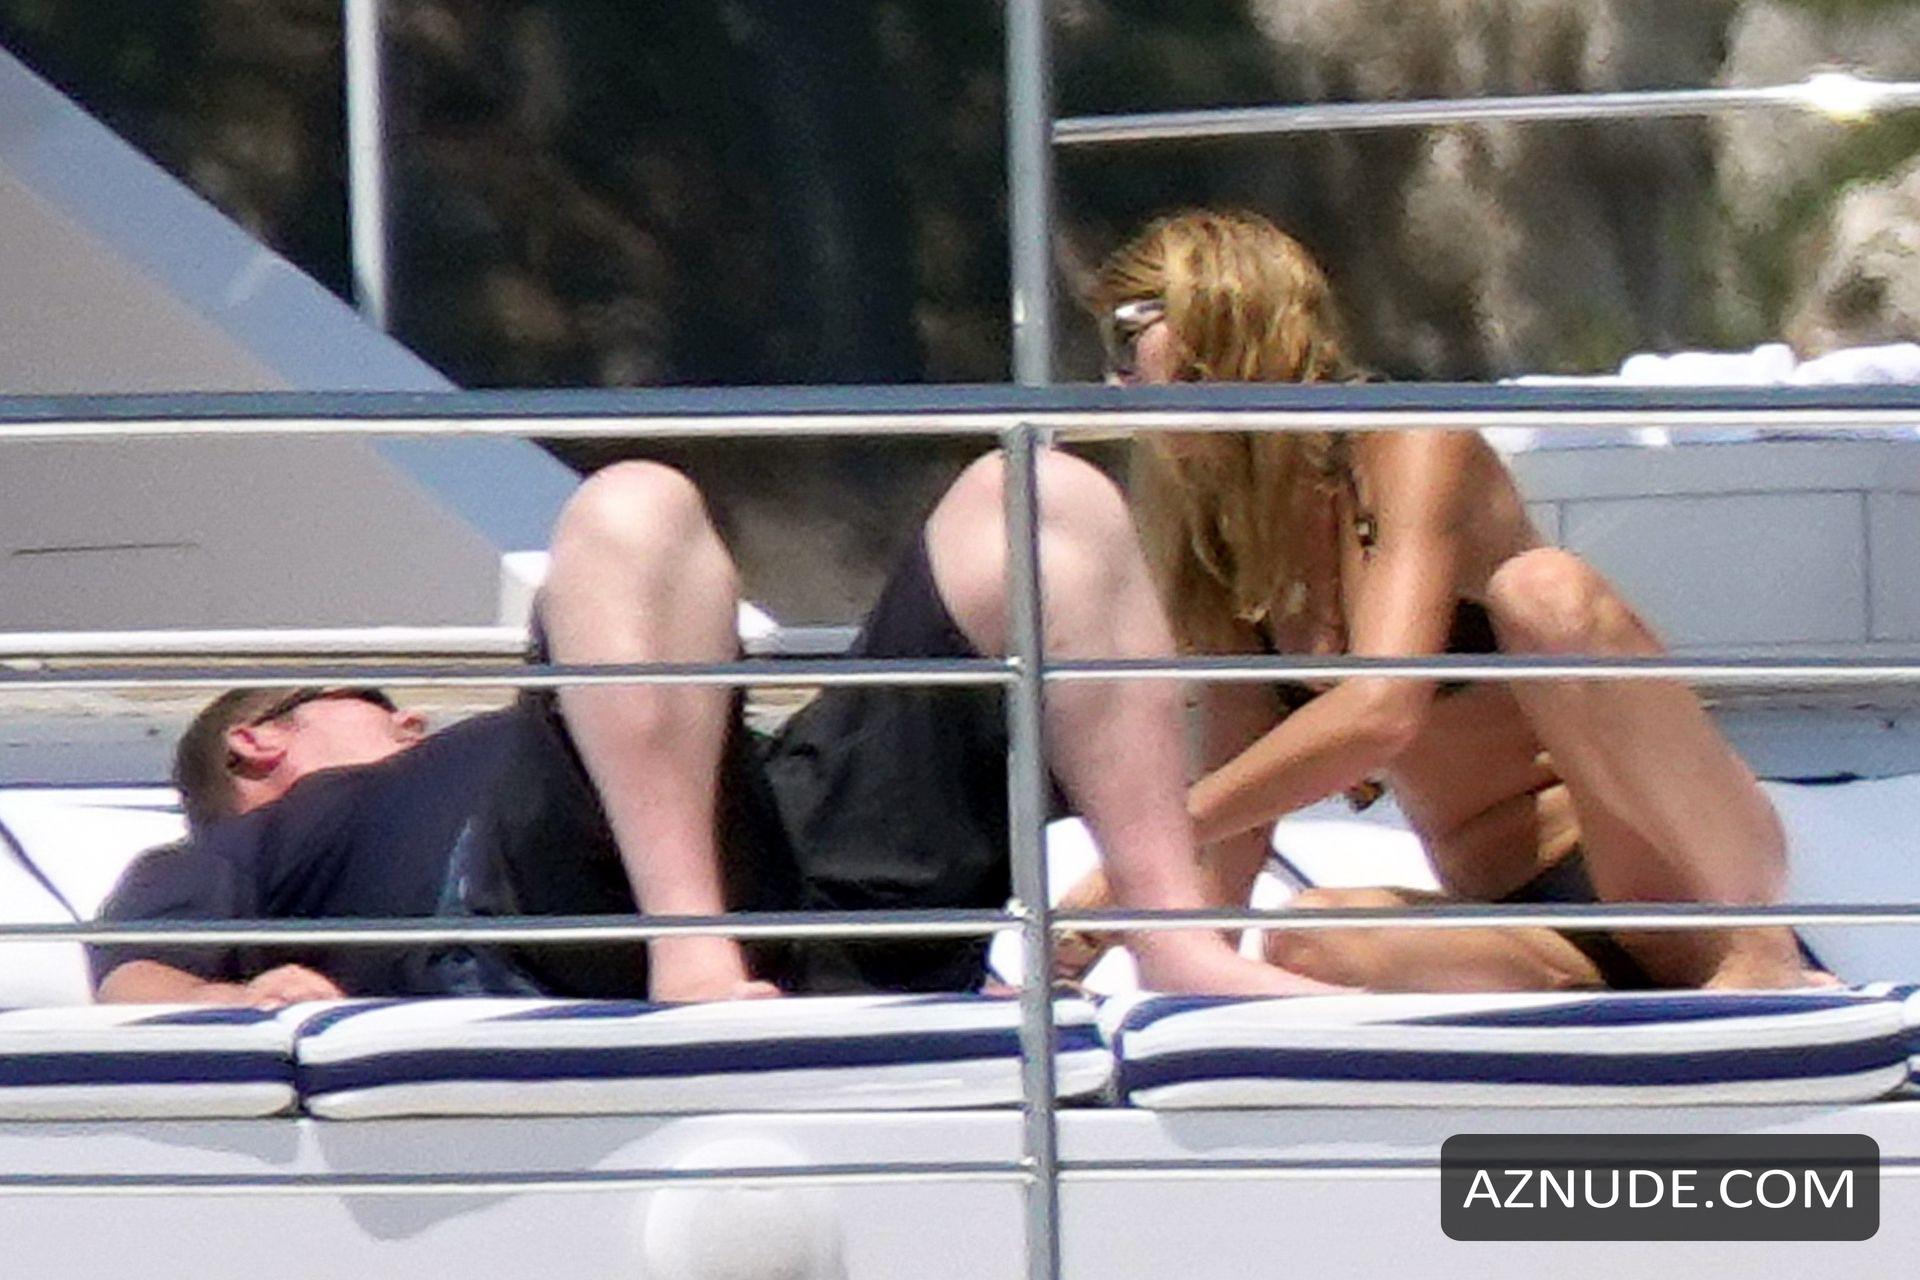 James Packer Enjoys The Holidays And Soaks Up The Sun On His Super